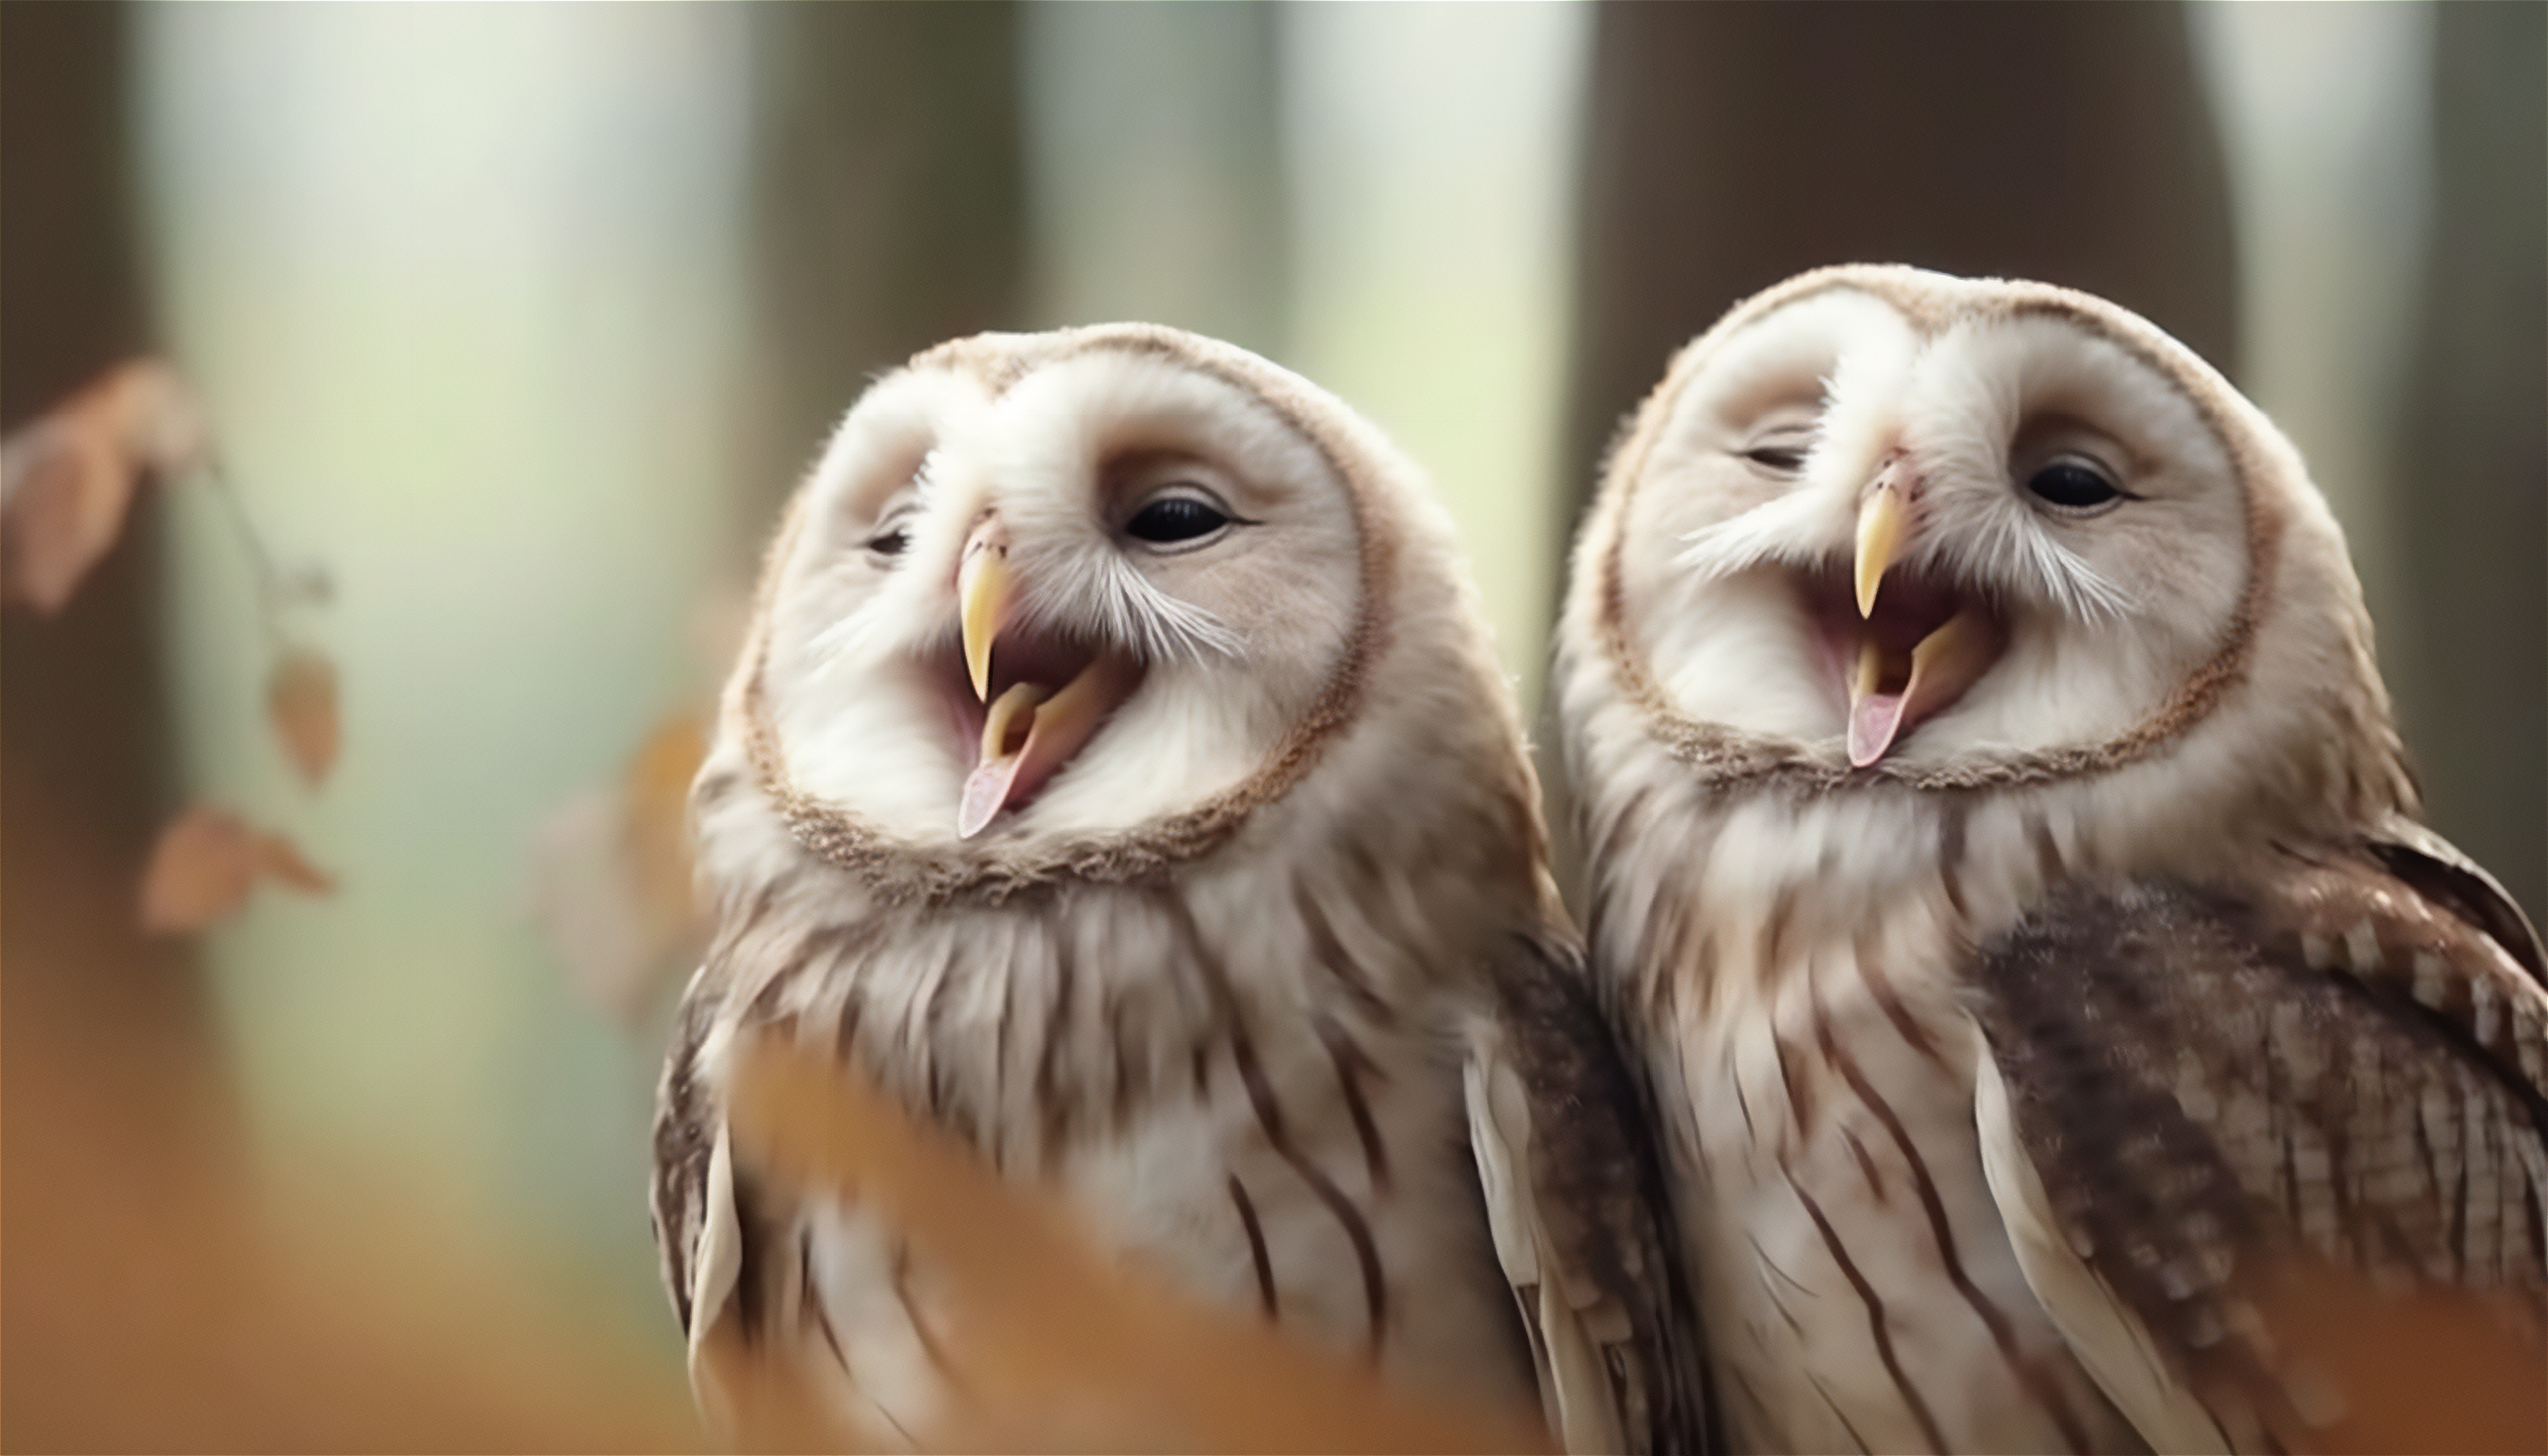 General 3136x1792 AI art owl laughing animals nature